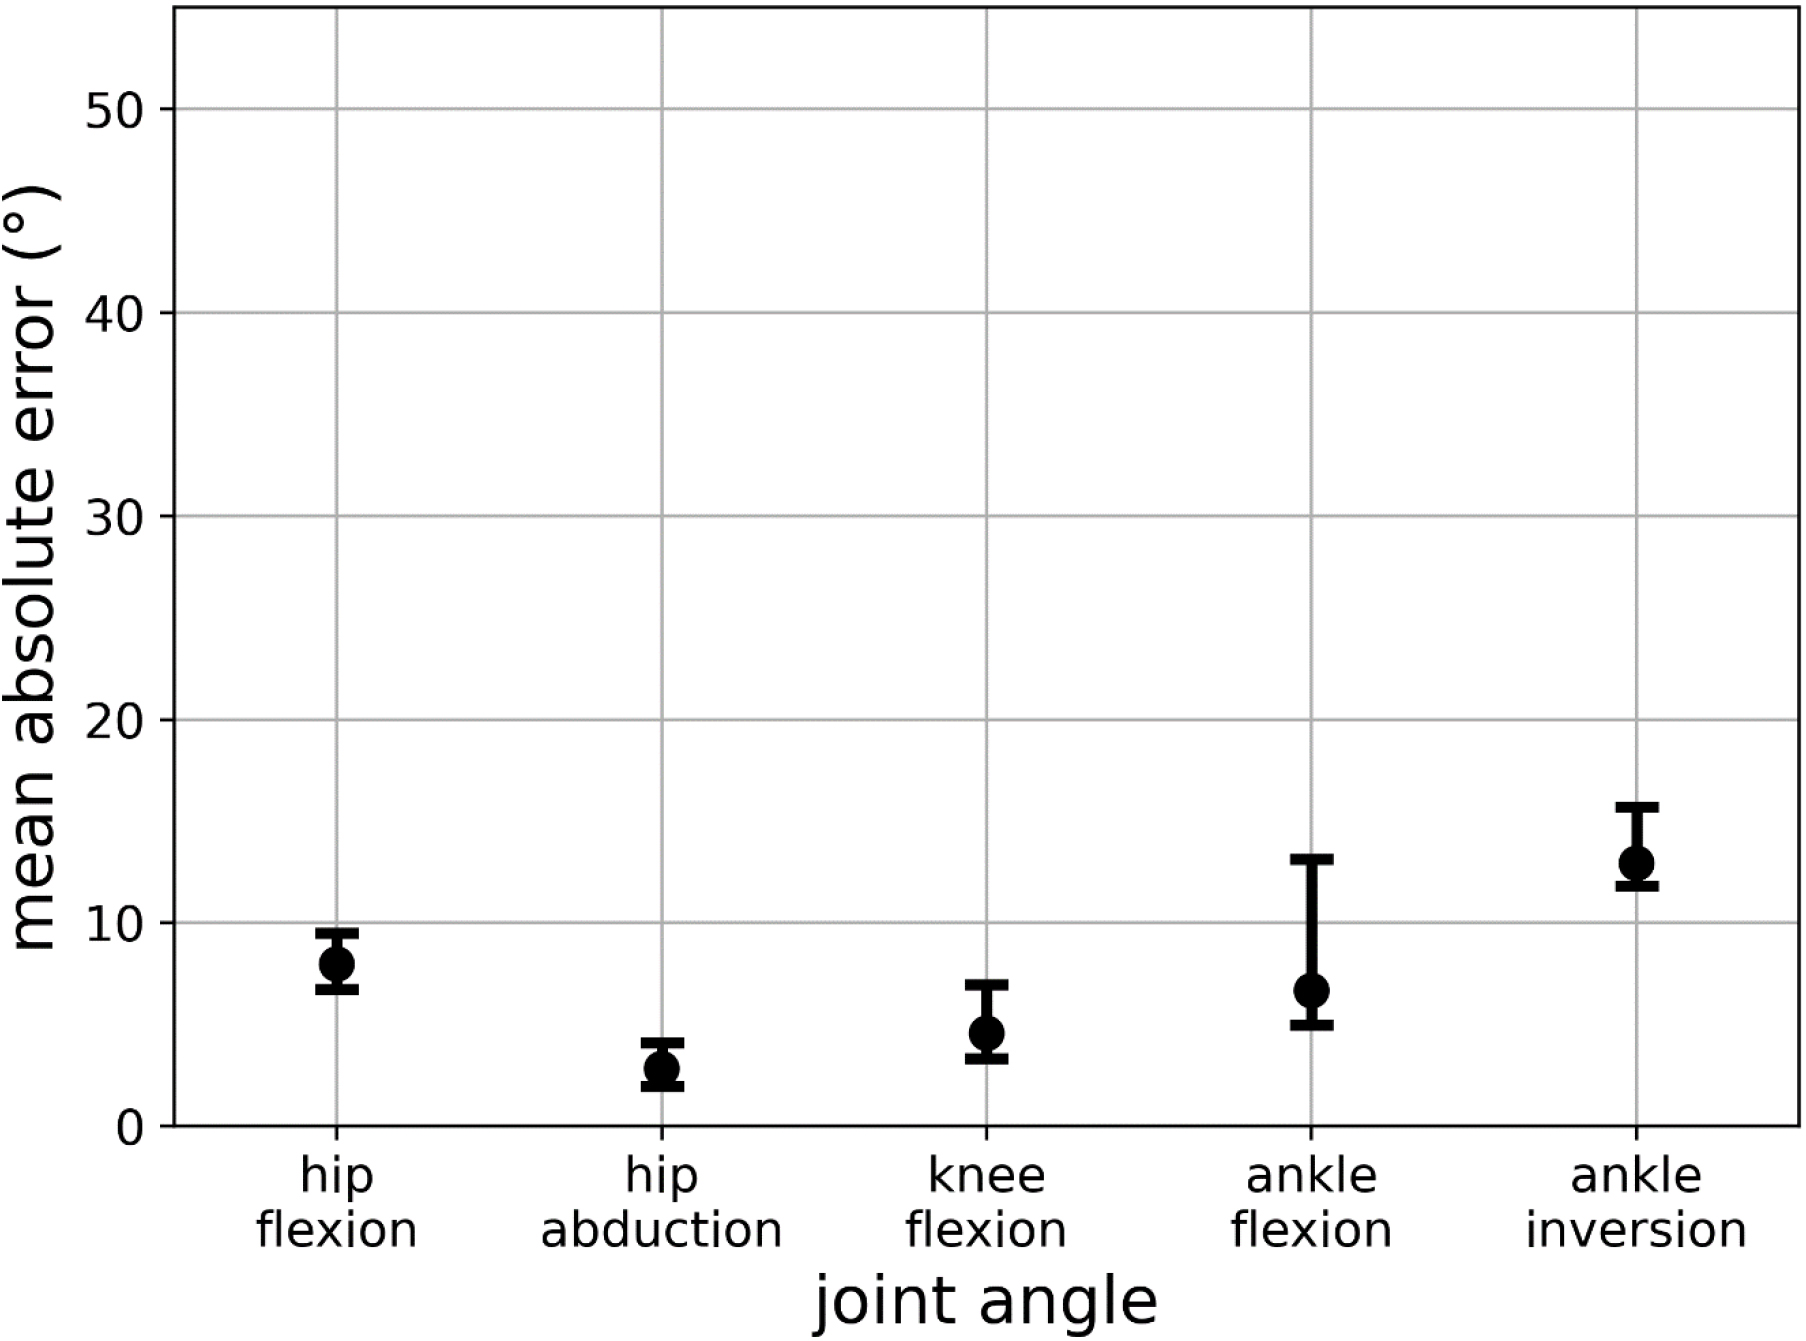 Point plot of median mean absolute error (MAE) of the leg joints including the 95% CI.